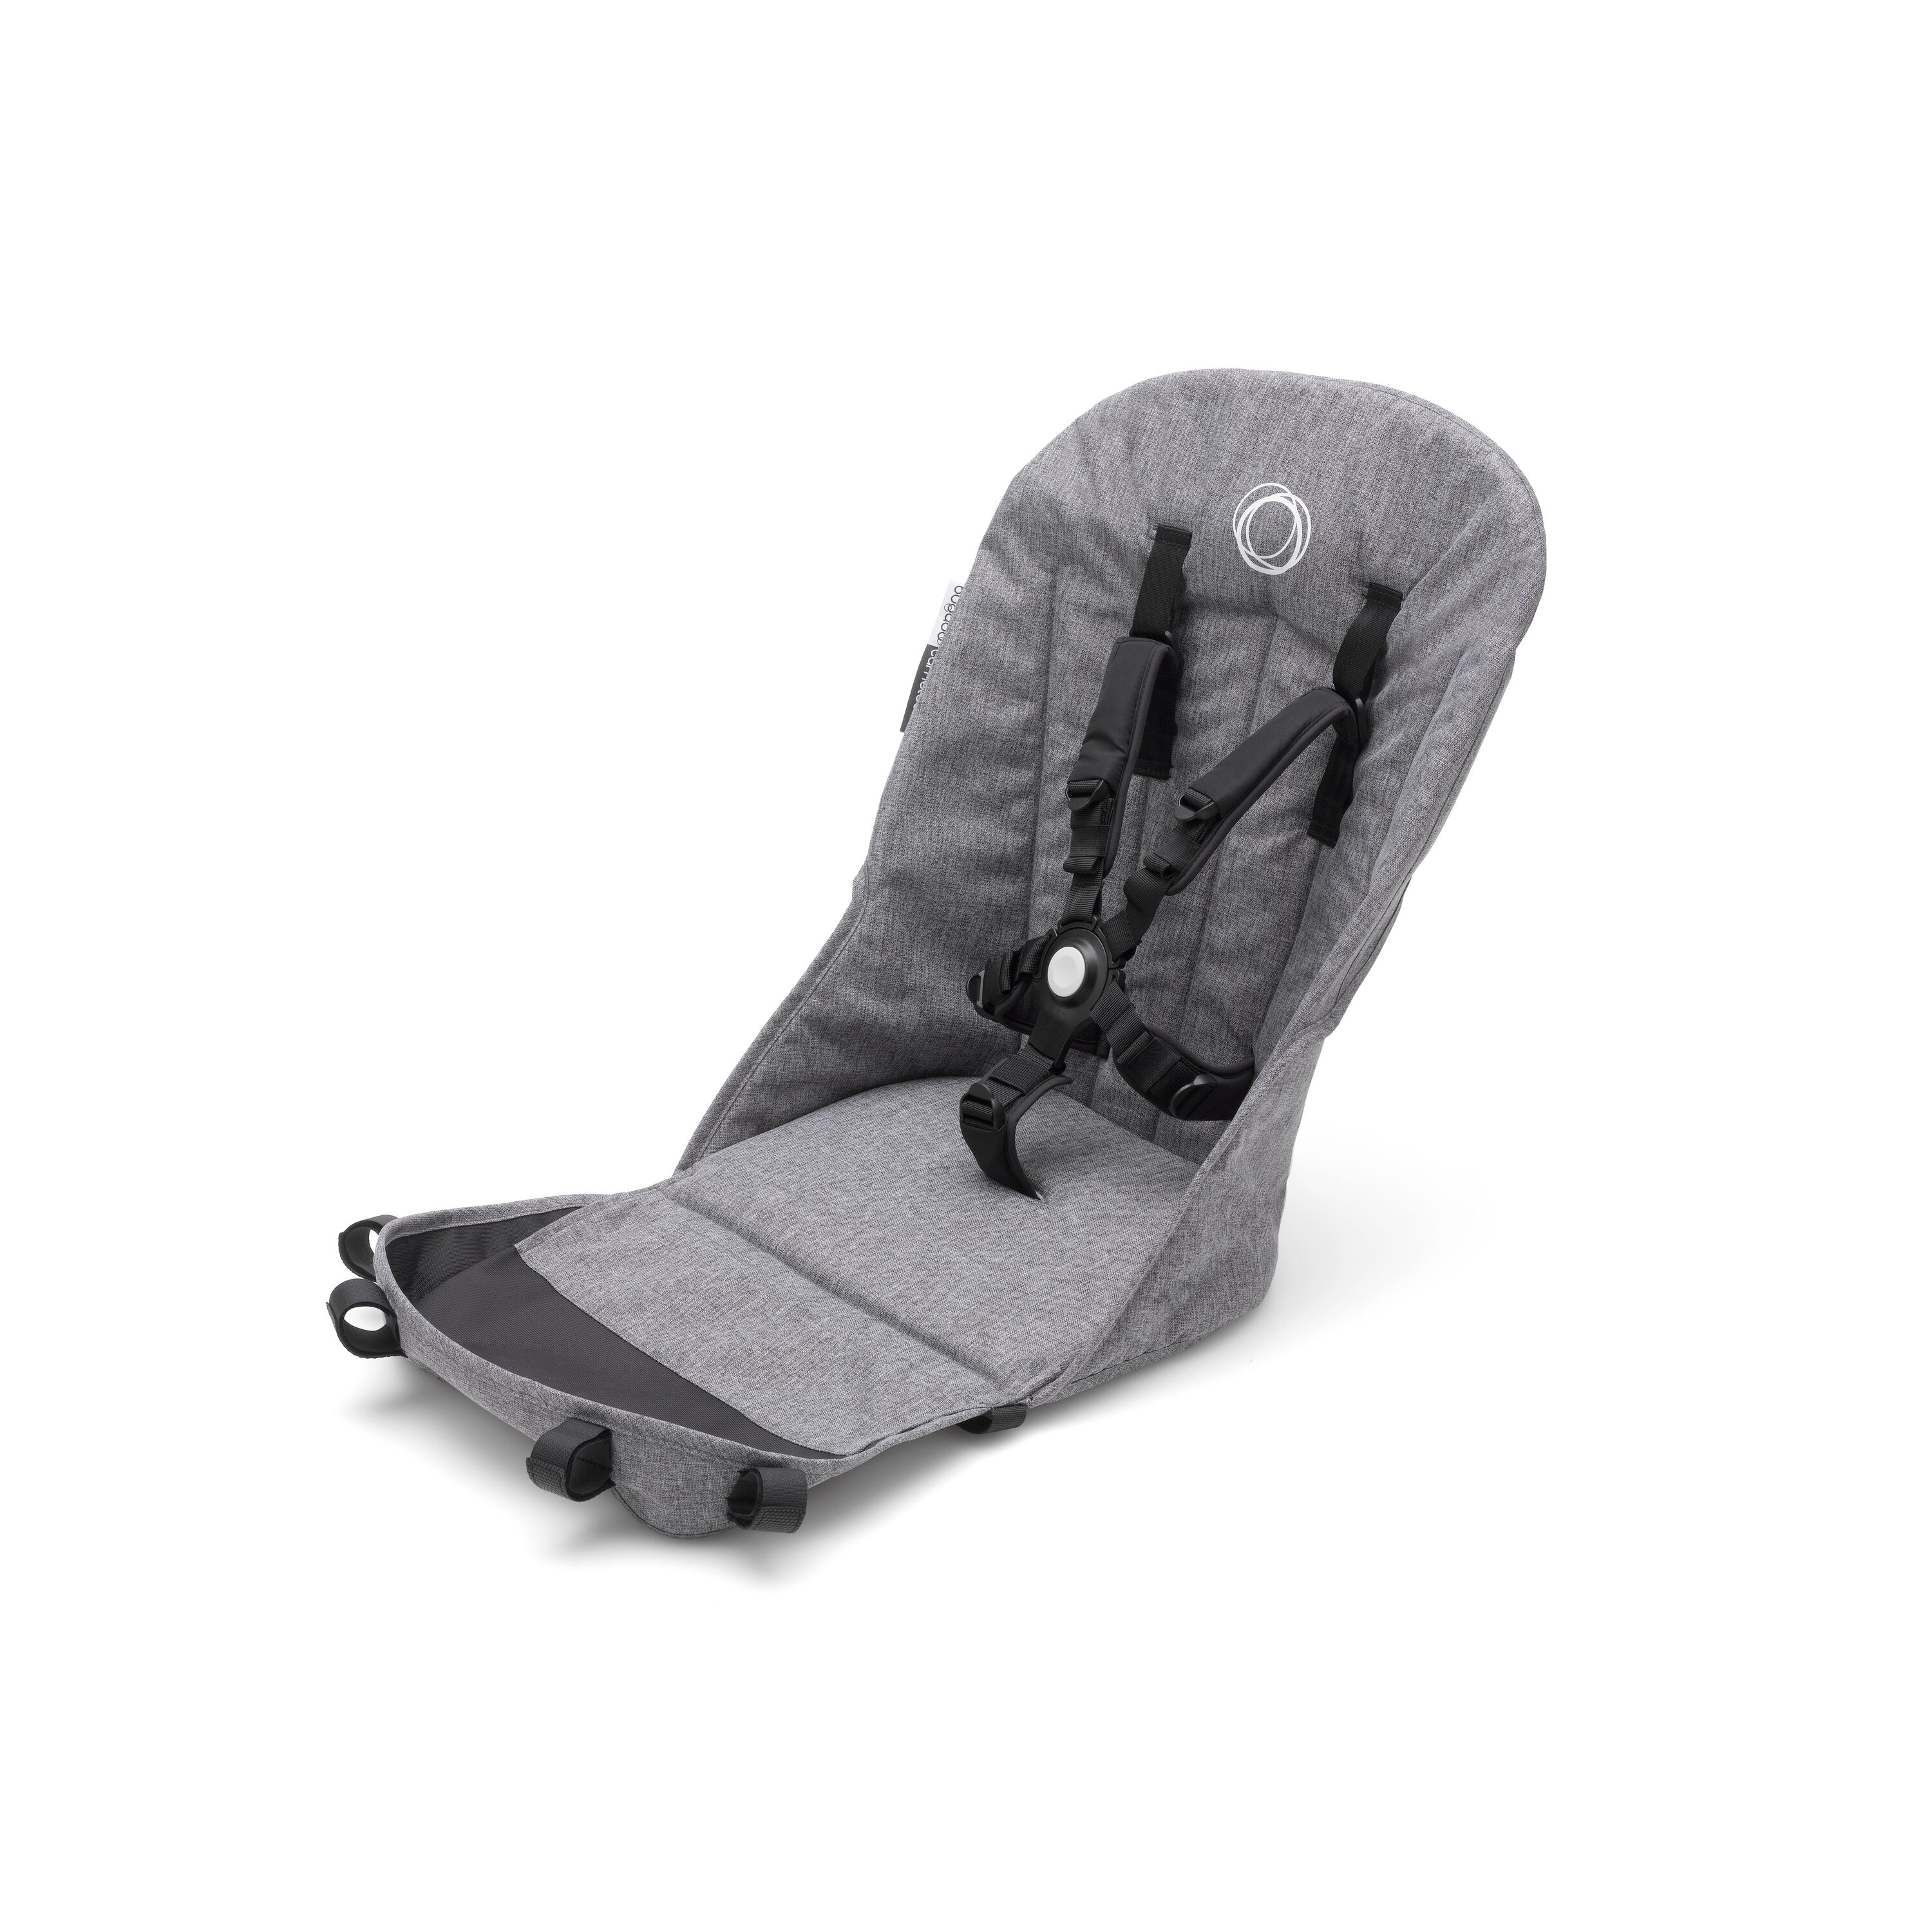 Bugaboo Cameleon 3 Plus seat and carrycot pushchair Black sun